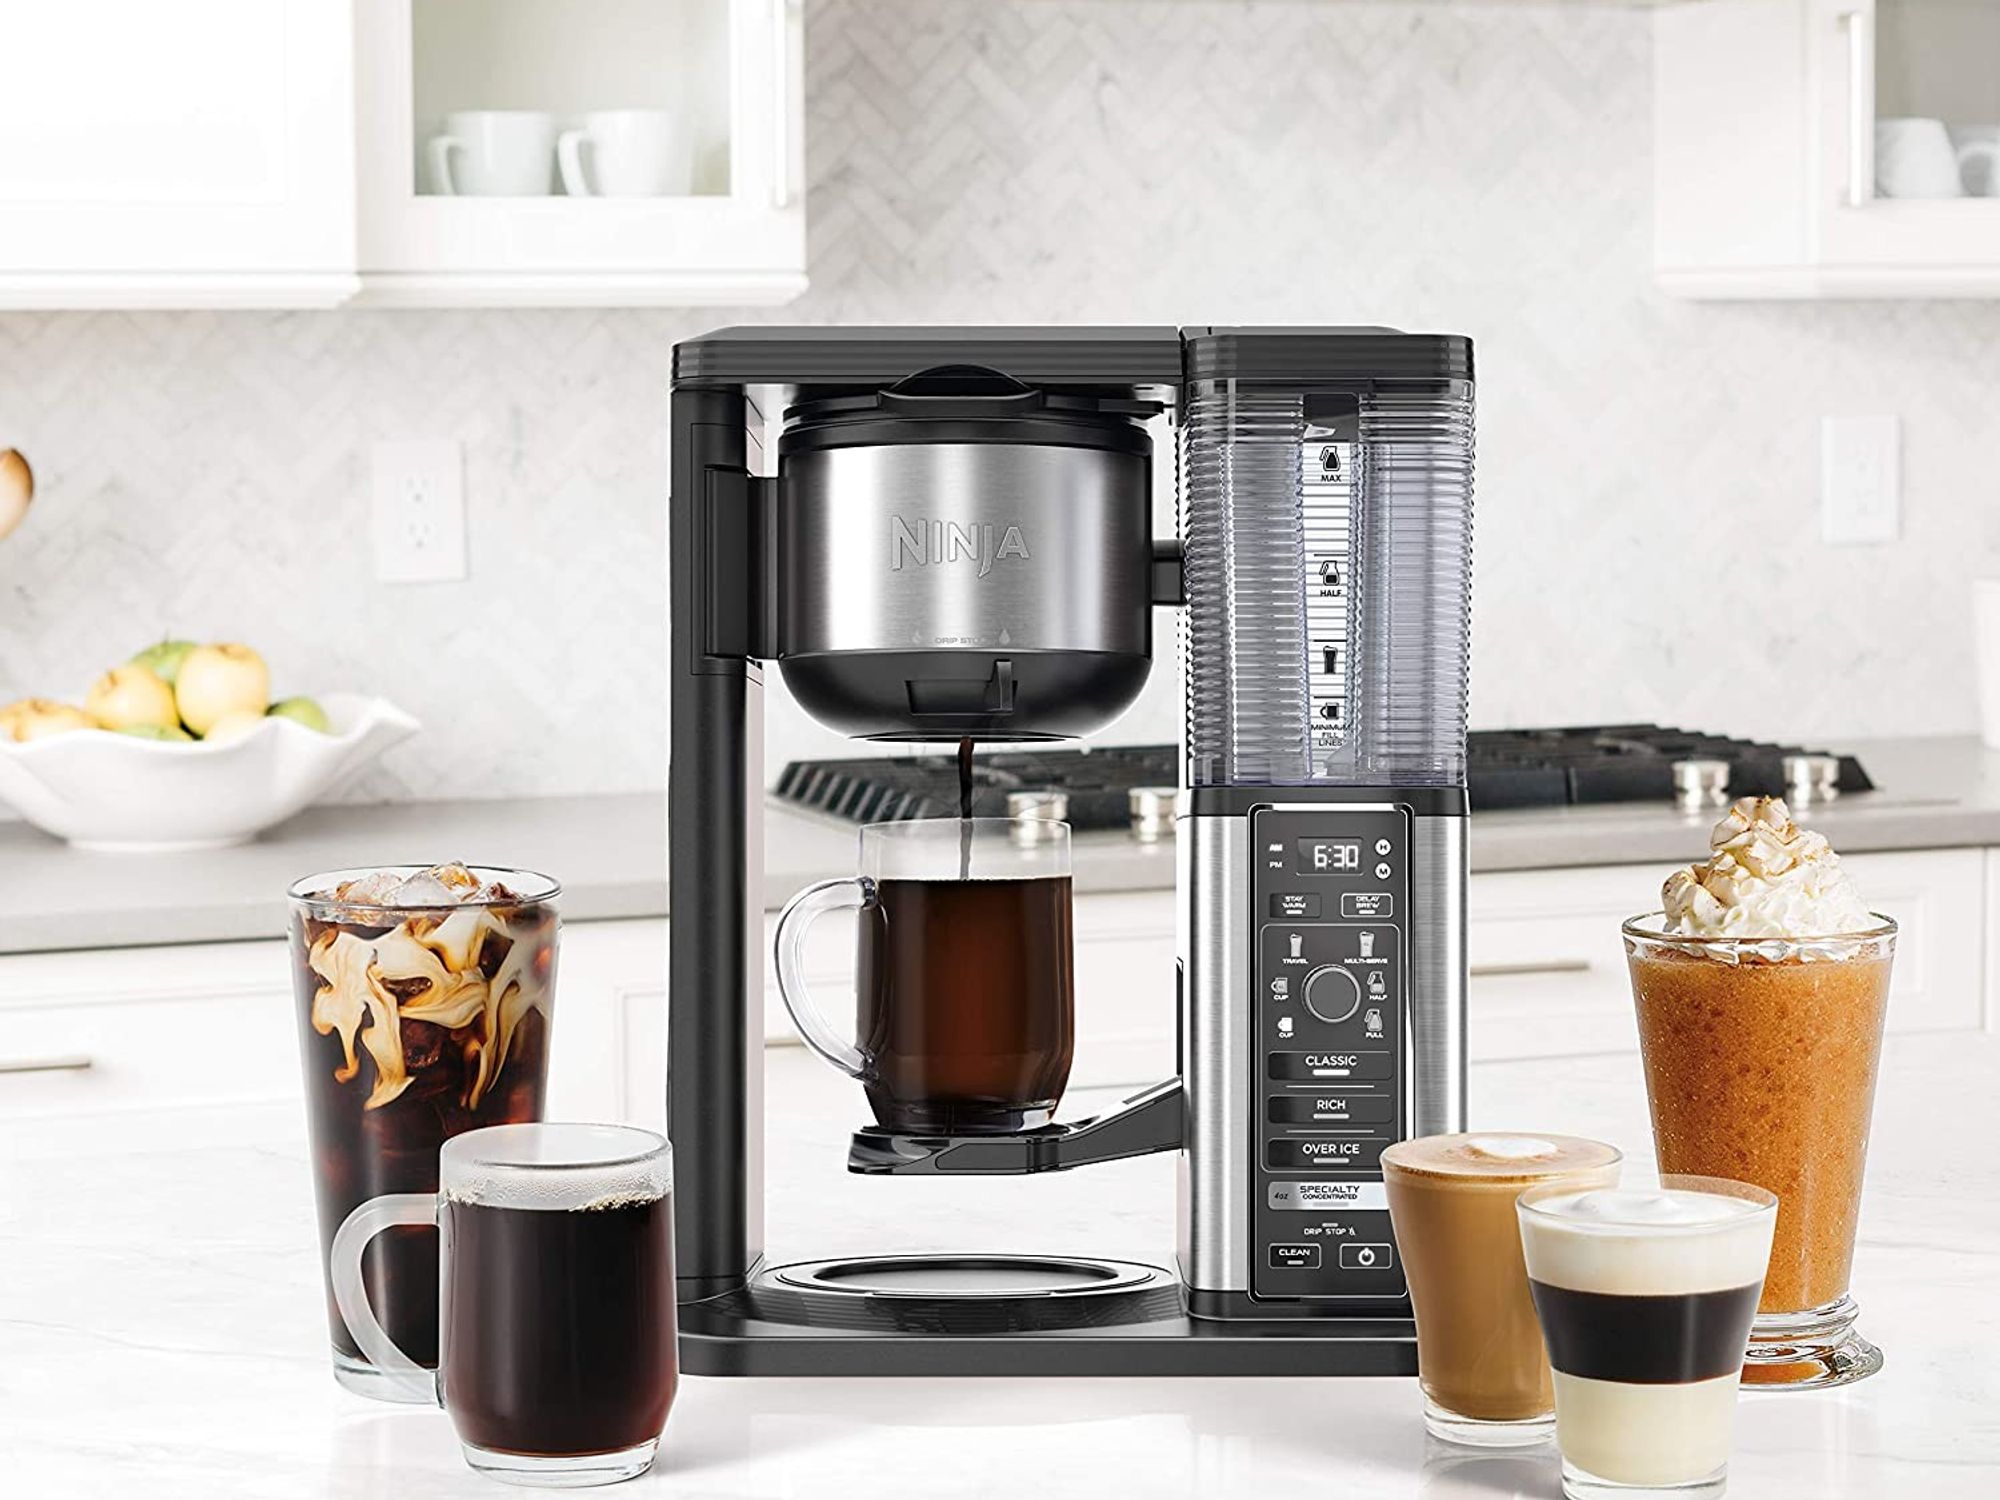 33 Best Cyber Monday Kitchen Deals: Final Hours to Save on Keurig, Ninja,  and More